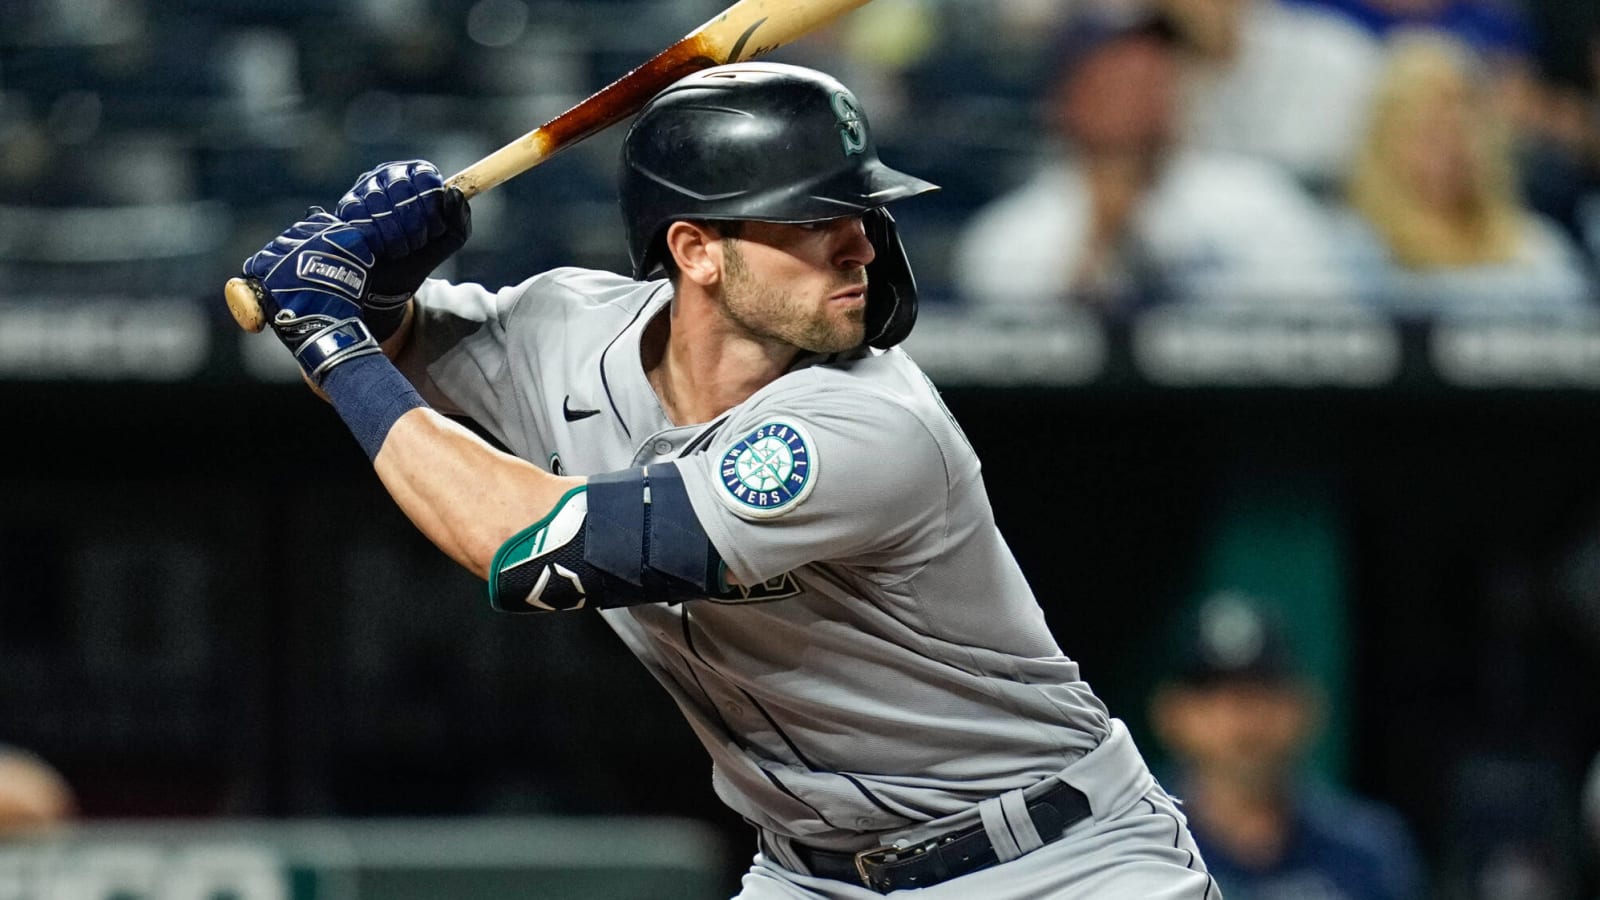 Baseballer - BREAKING: Mitch Haniger is headed to the